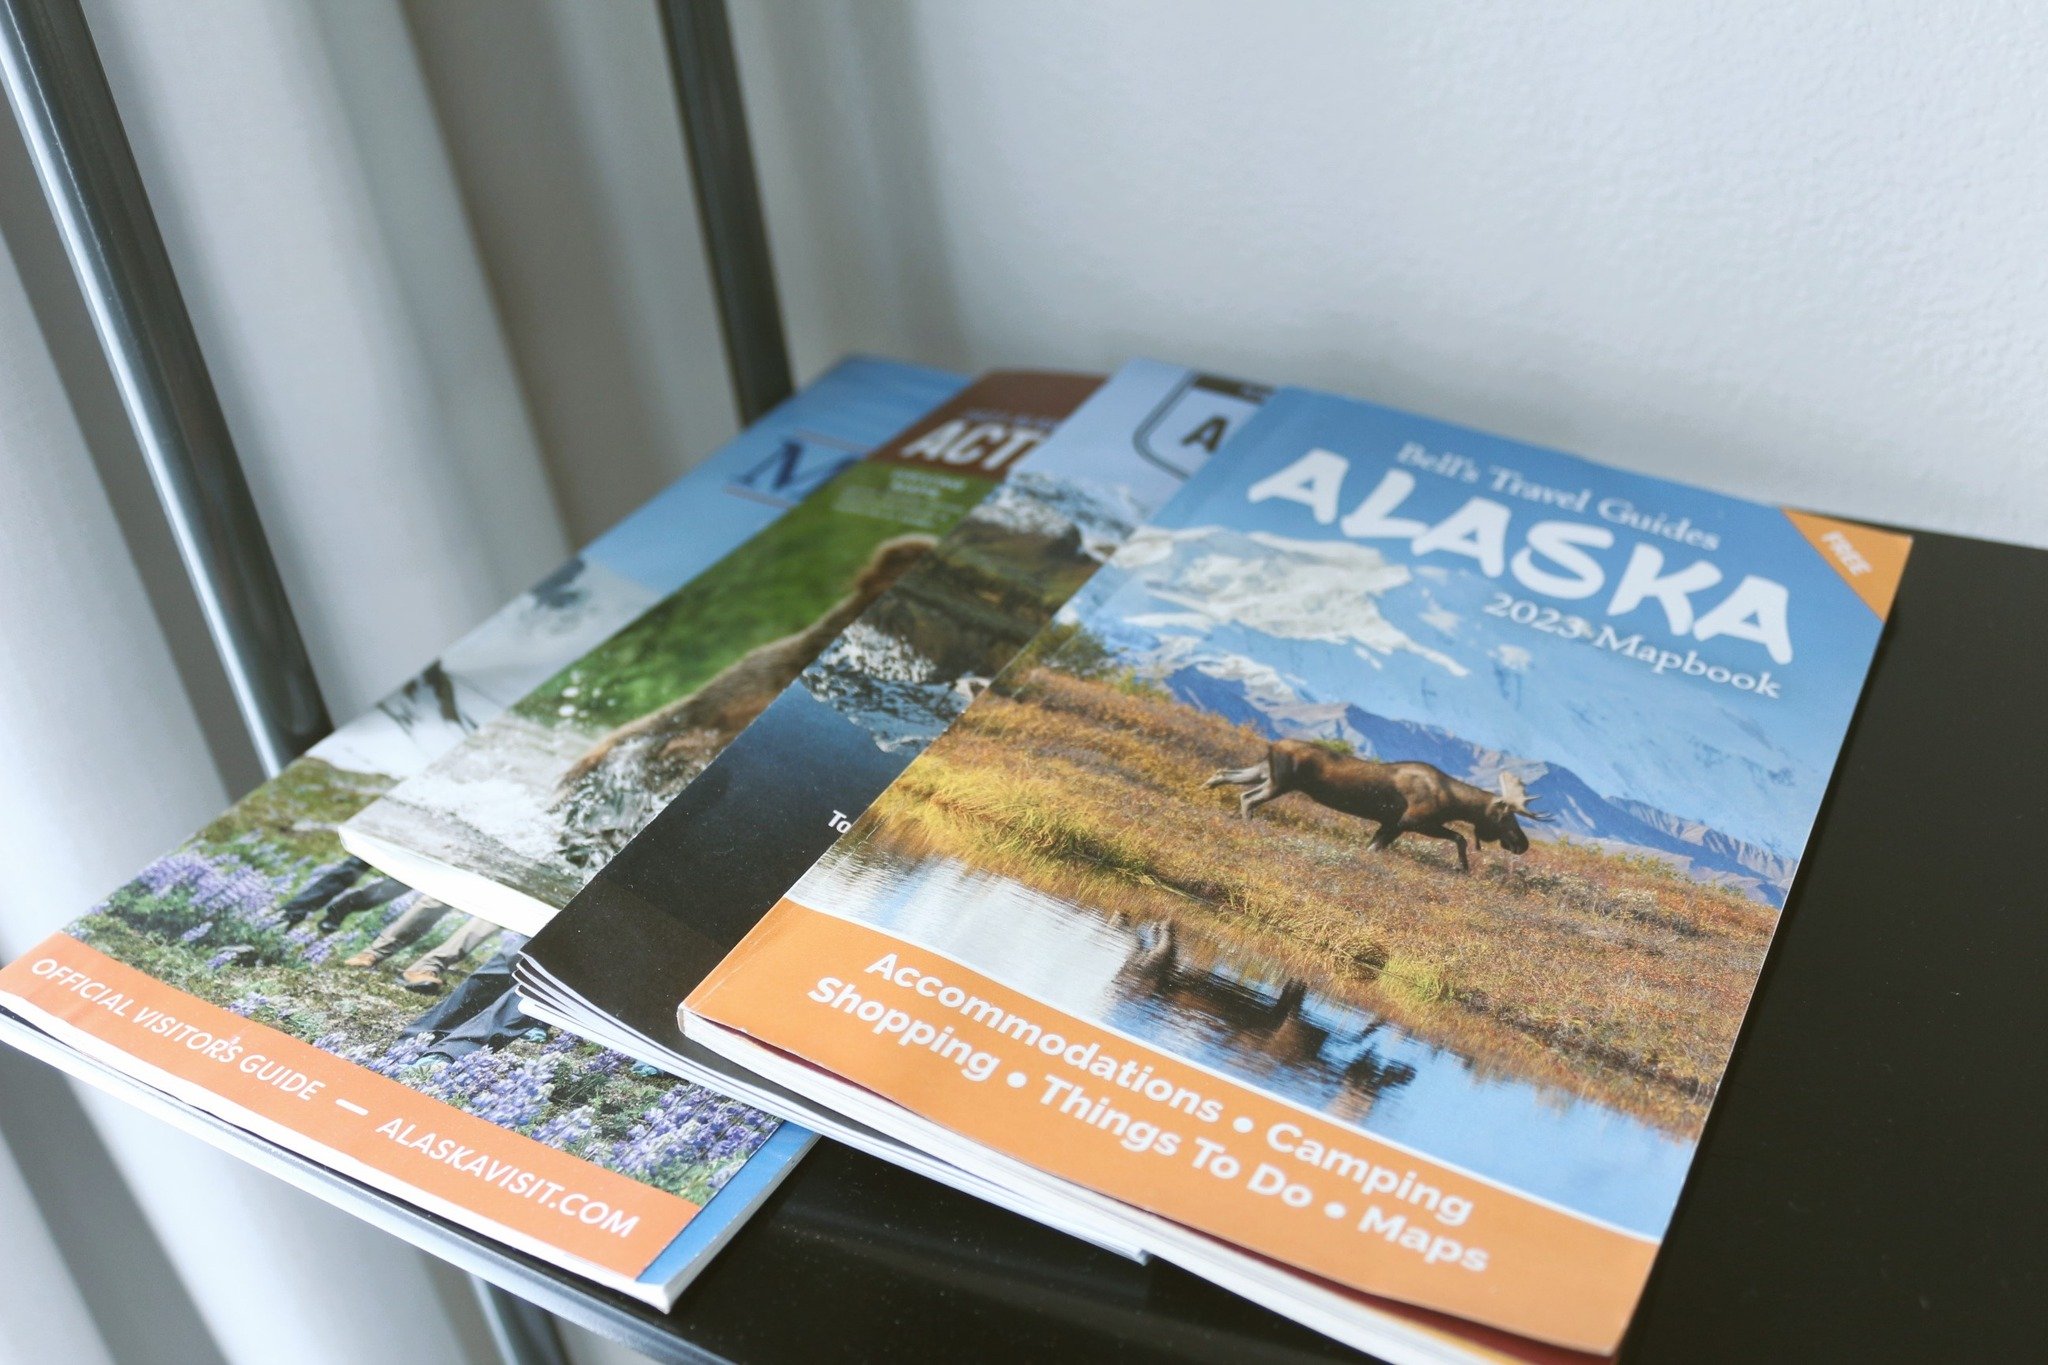 Want more places to explore during your stay?
We have an abundance of travel guides in both the cabins and in the lodge!
We would love to help you pack your trip with as much adventuring as possible!